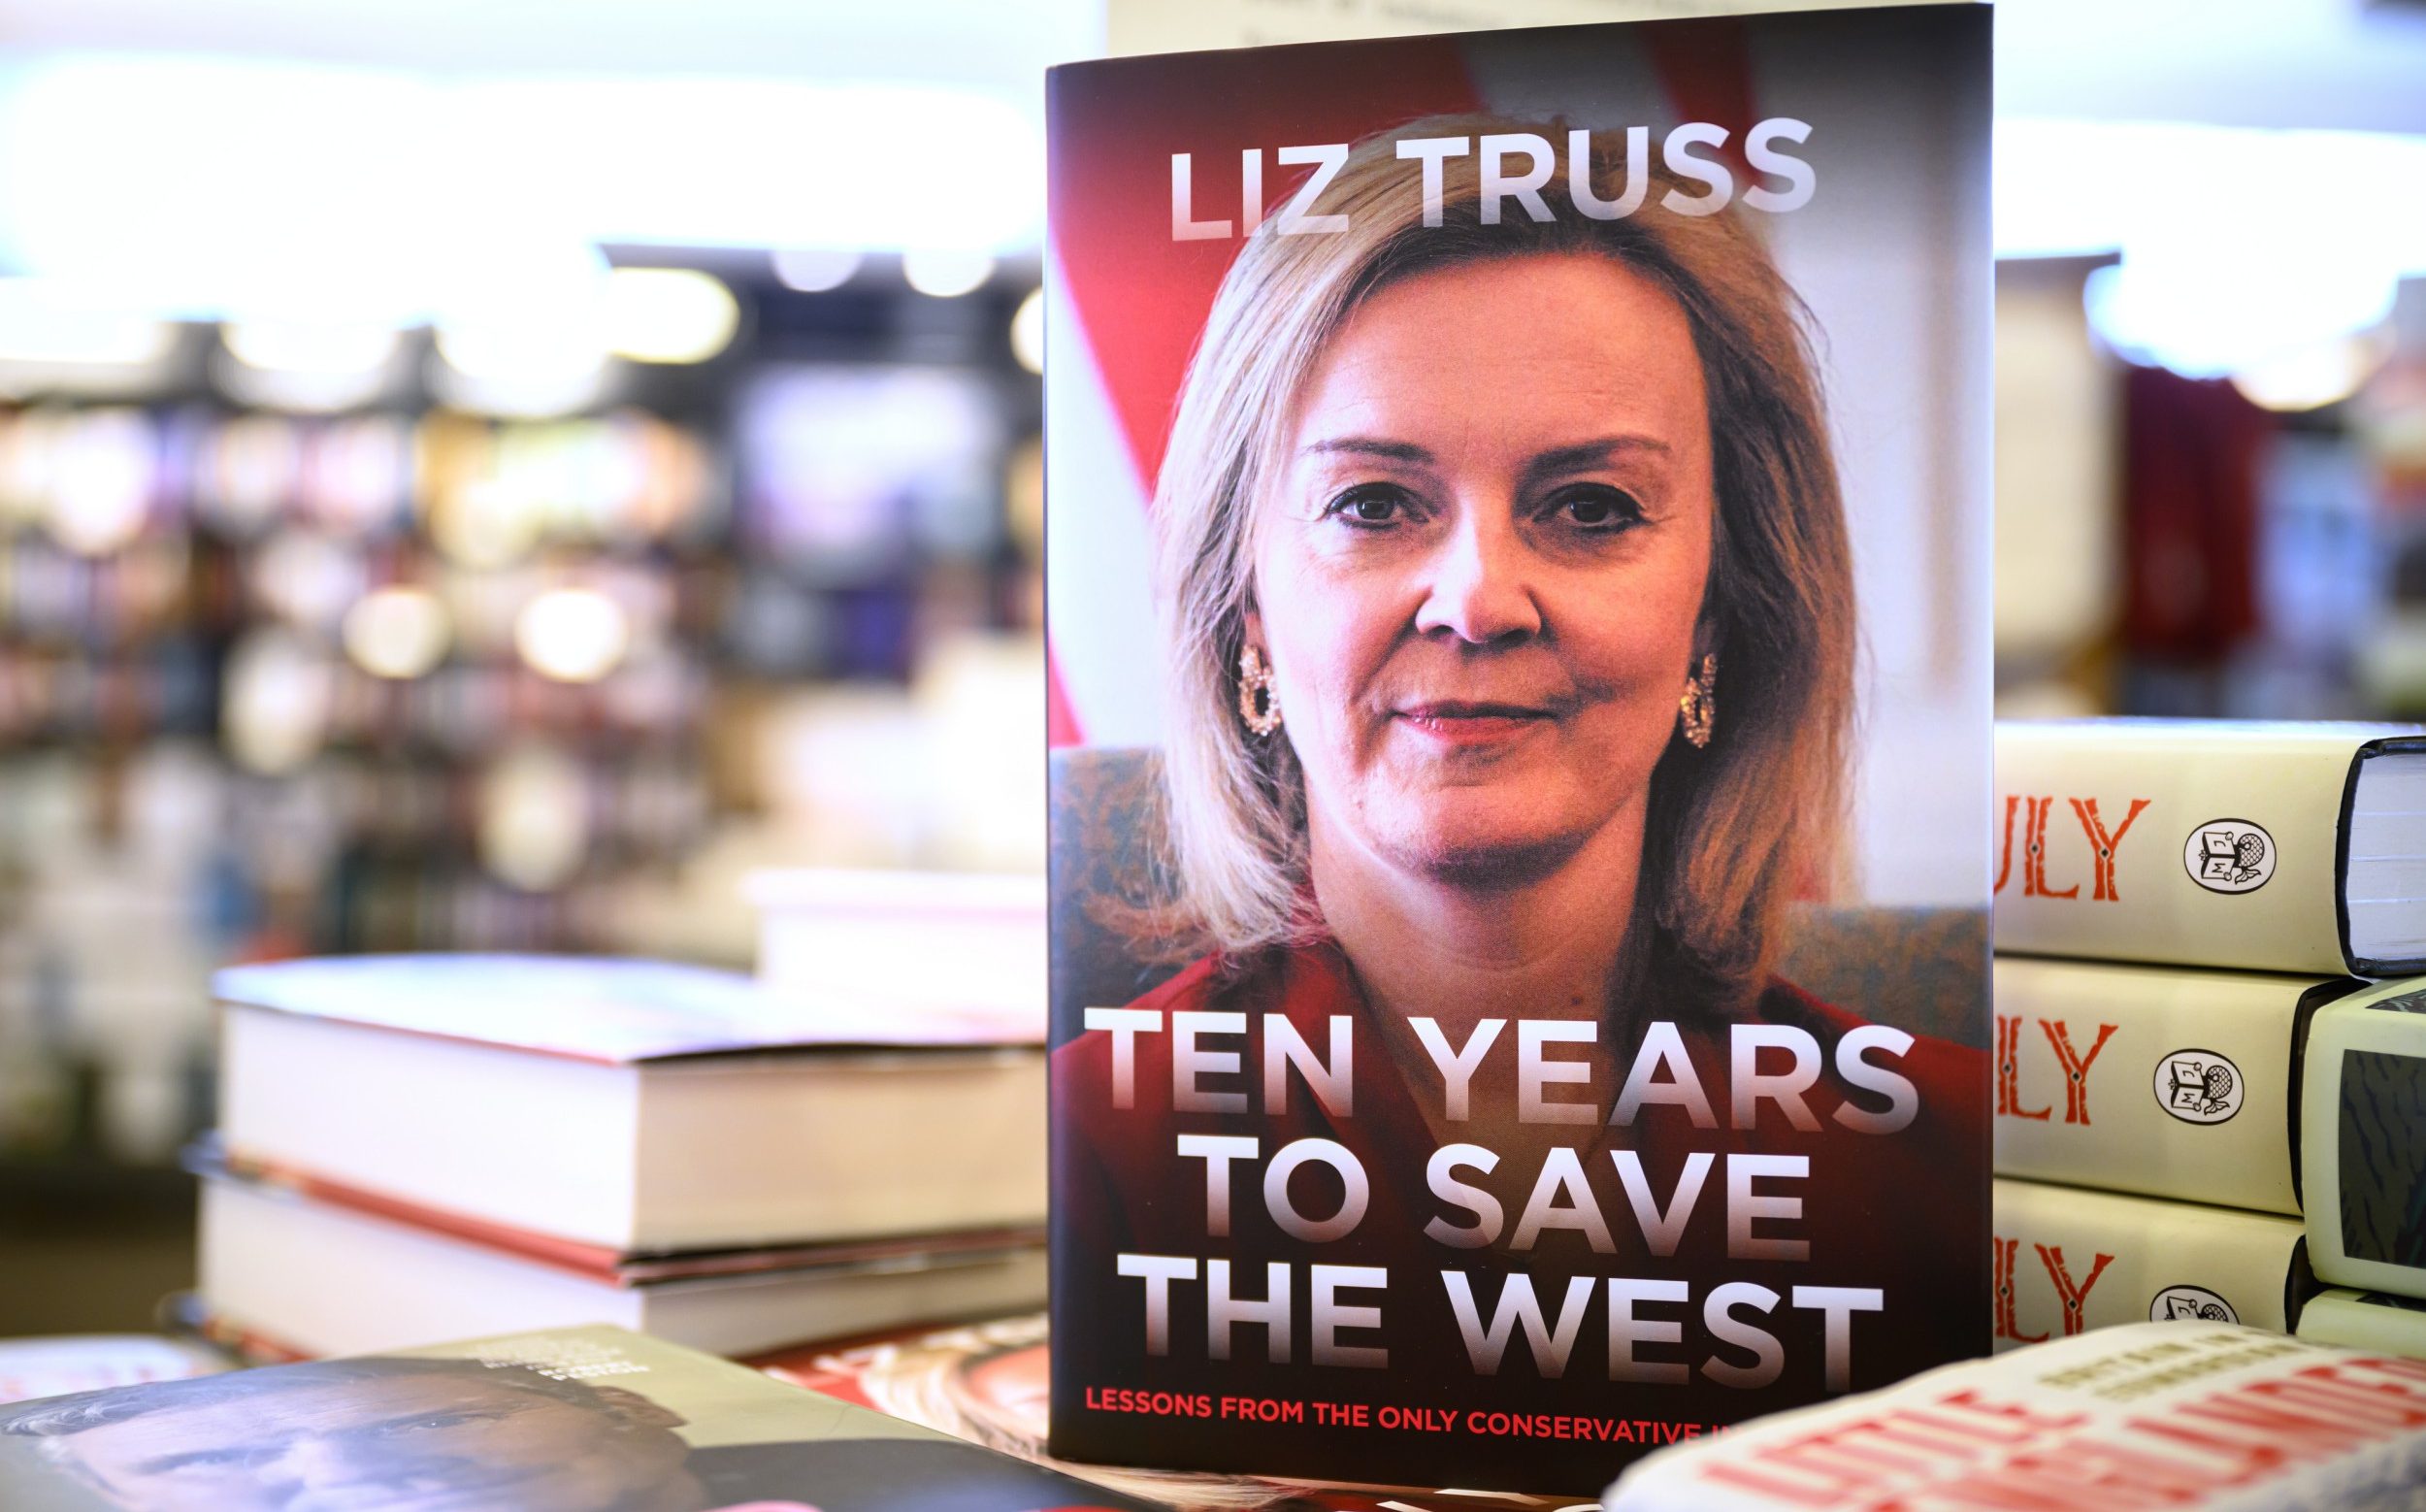 liz truss says she’s not trying to reinstate herself as prime minster